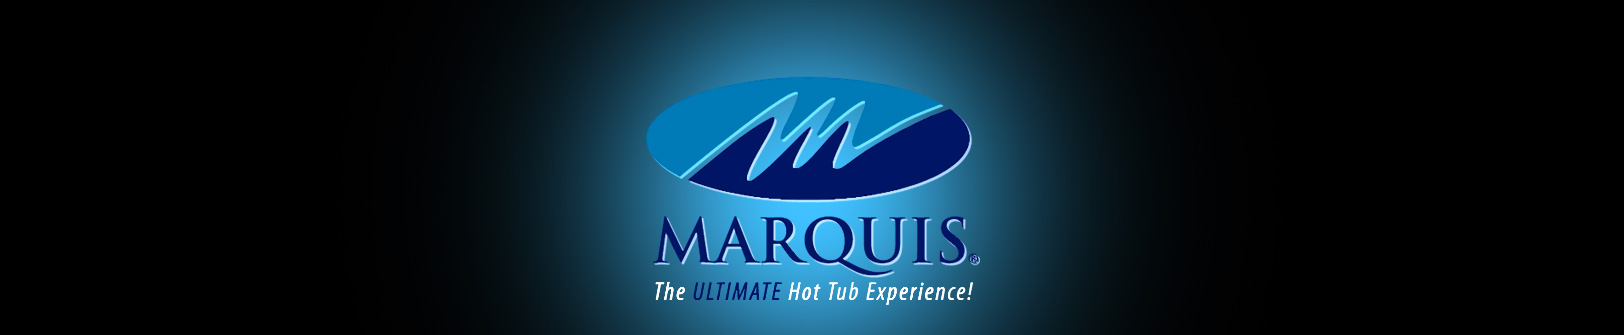 Marquis Deep Spas The Ultimate Hot Tub Experience